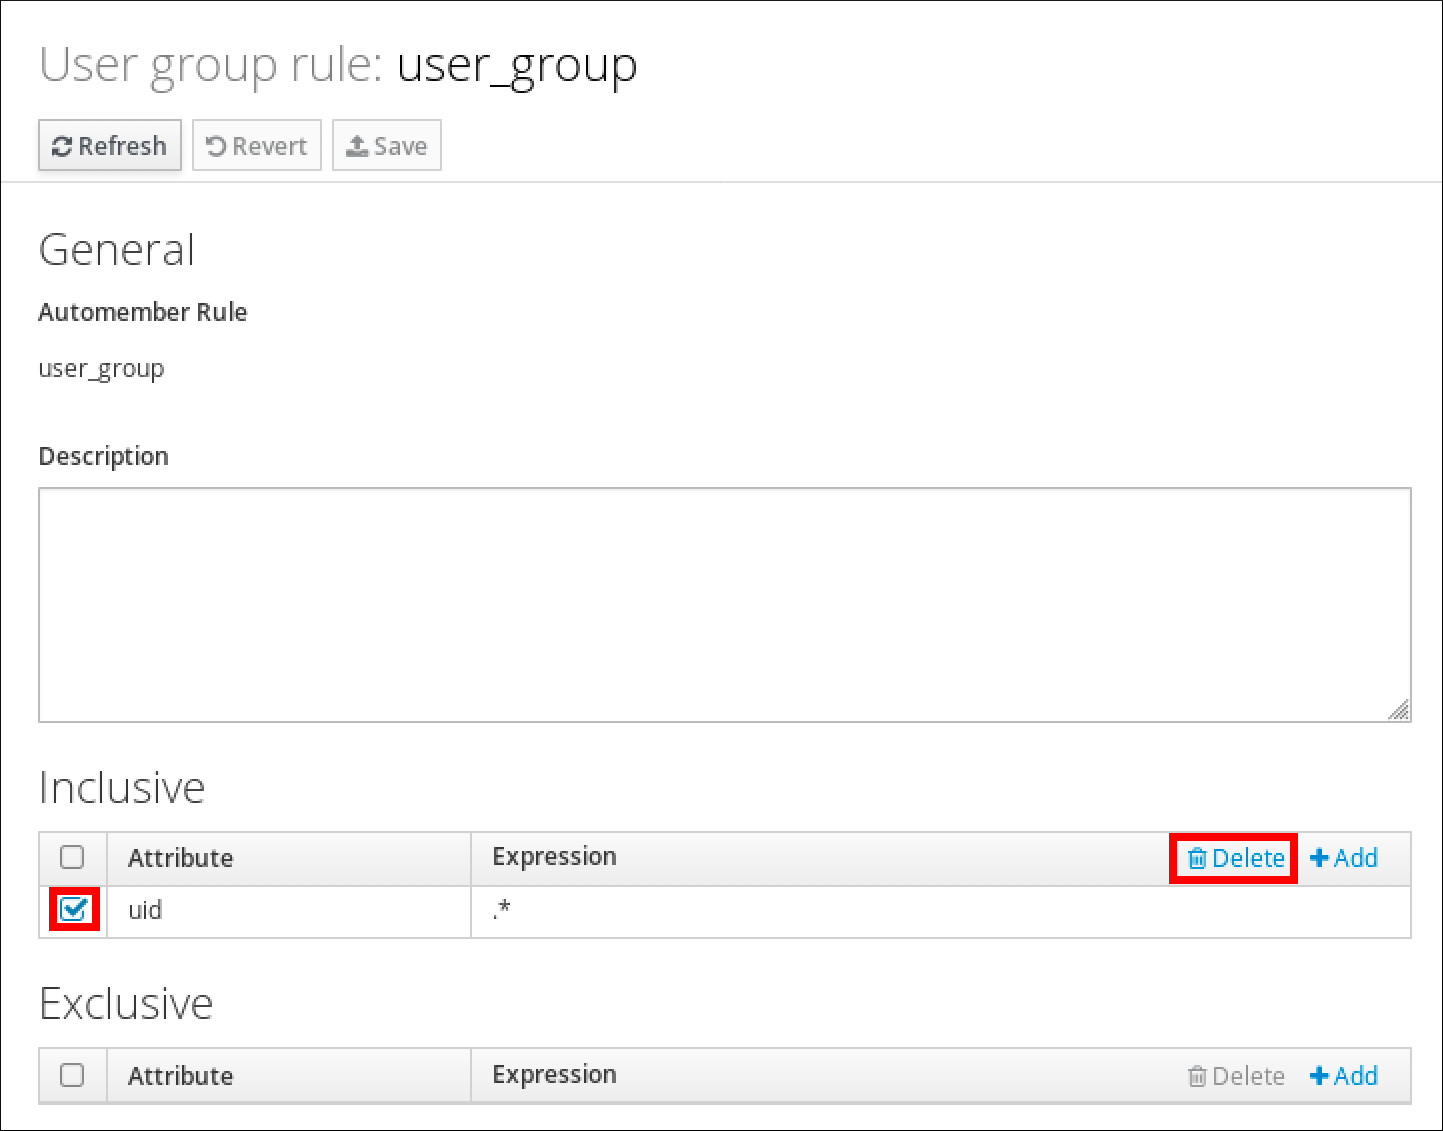 A screenshot of the "User group rule" page displaying information for "user_group". An entry in the "Inclusive" section has its checkbox checked and the "Delete" button that pertains to the "Inclusive" section is highlighted.